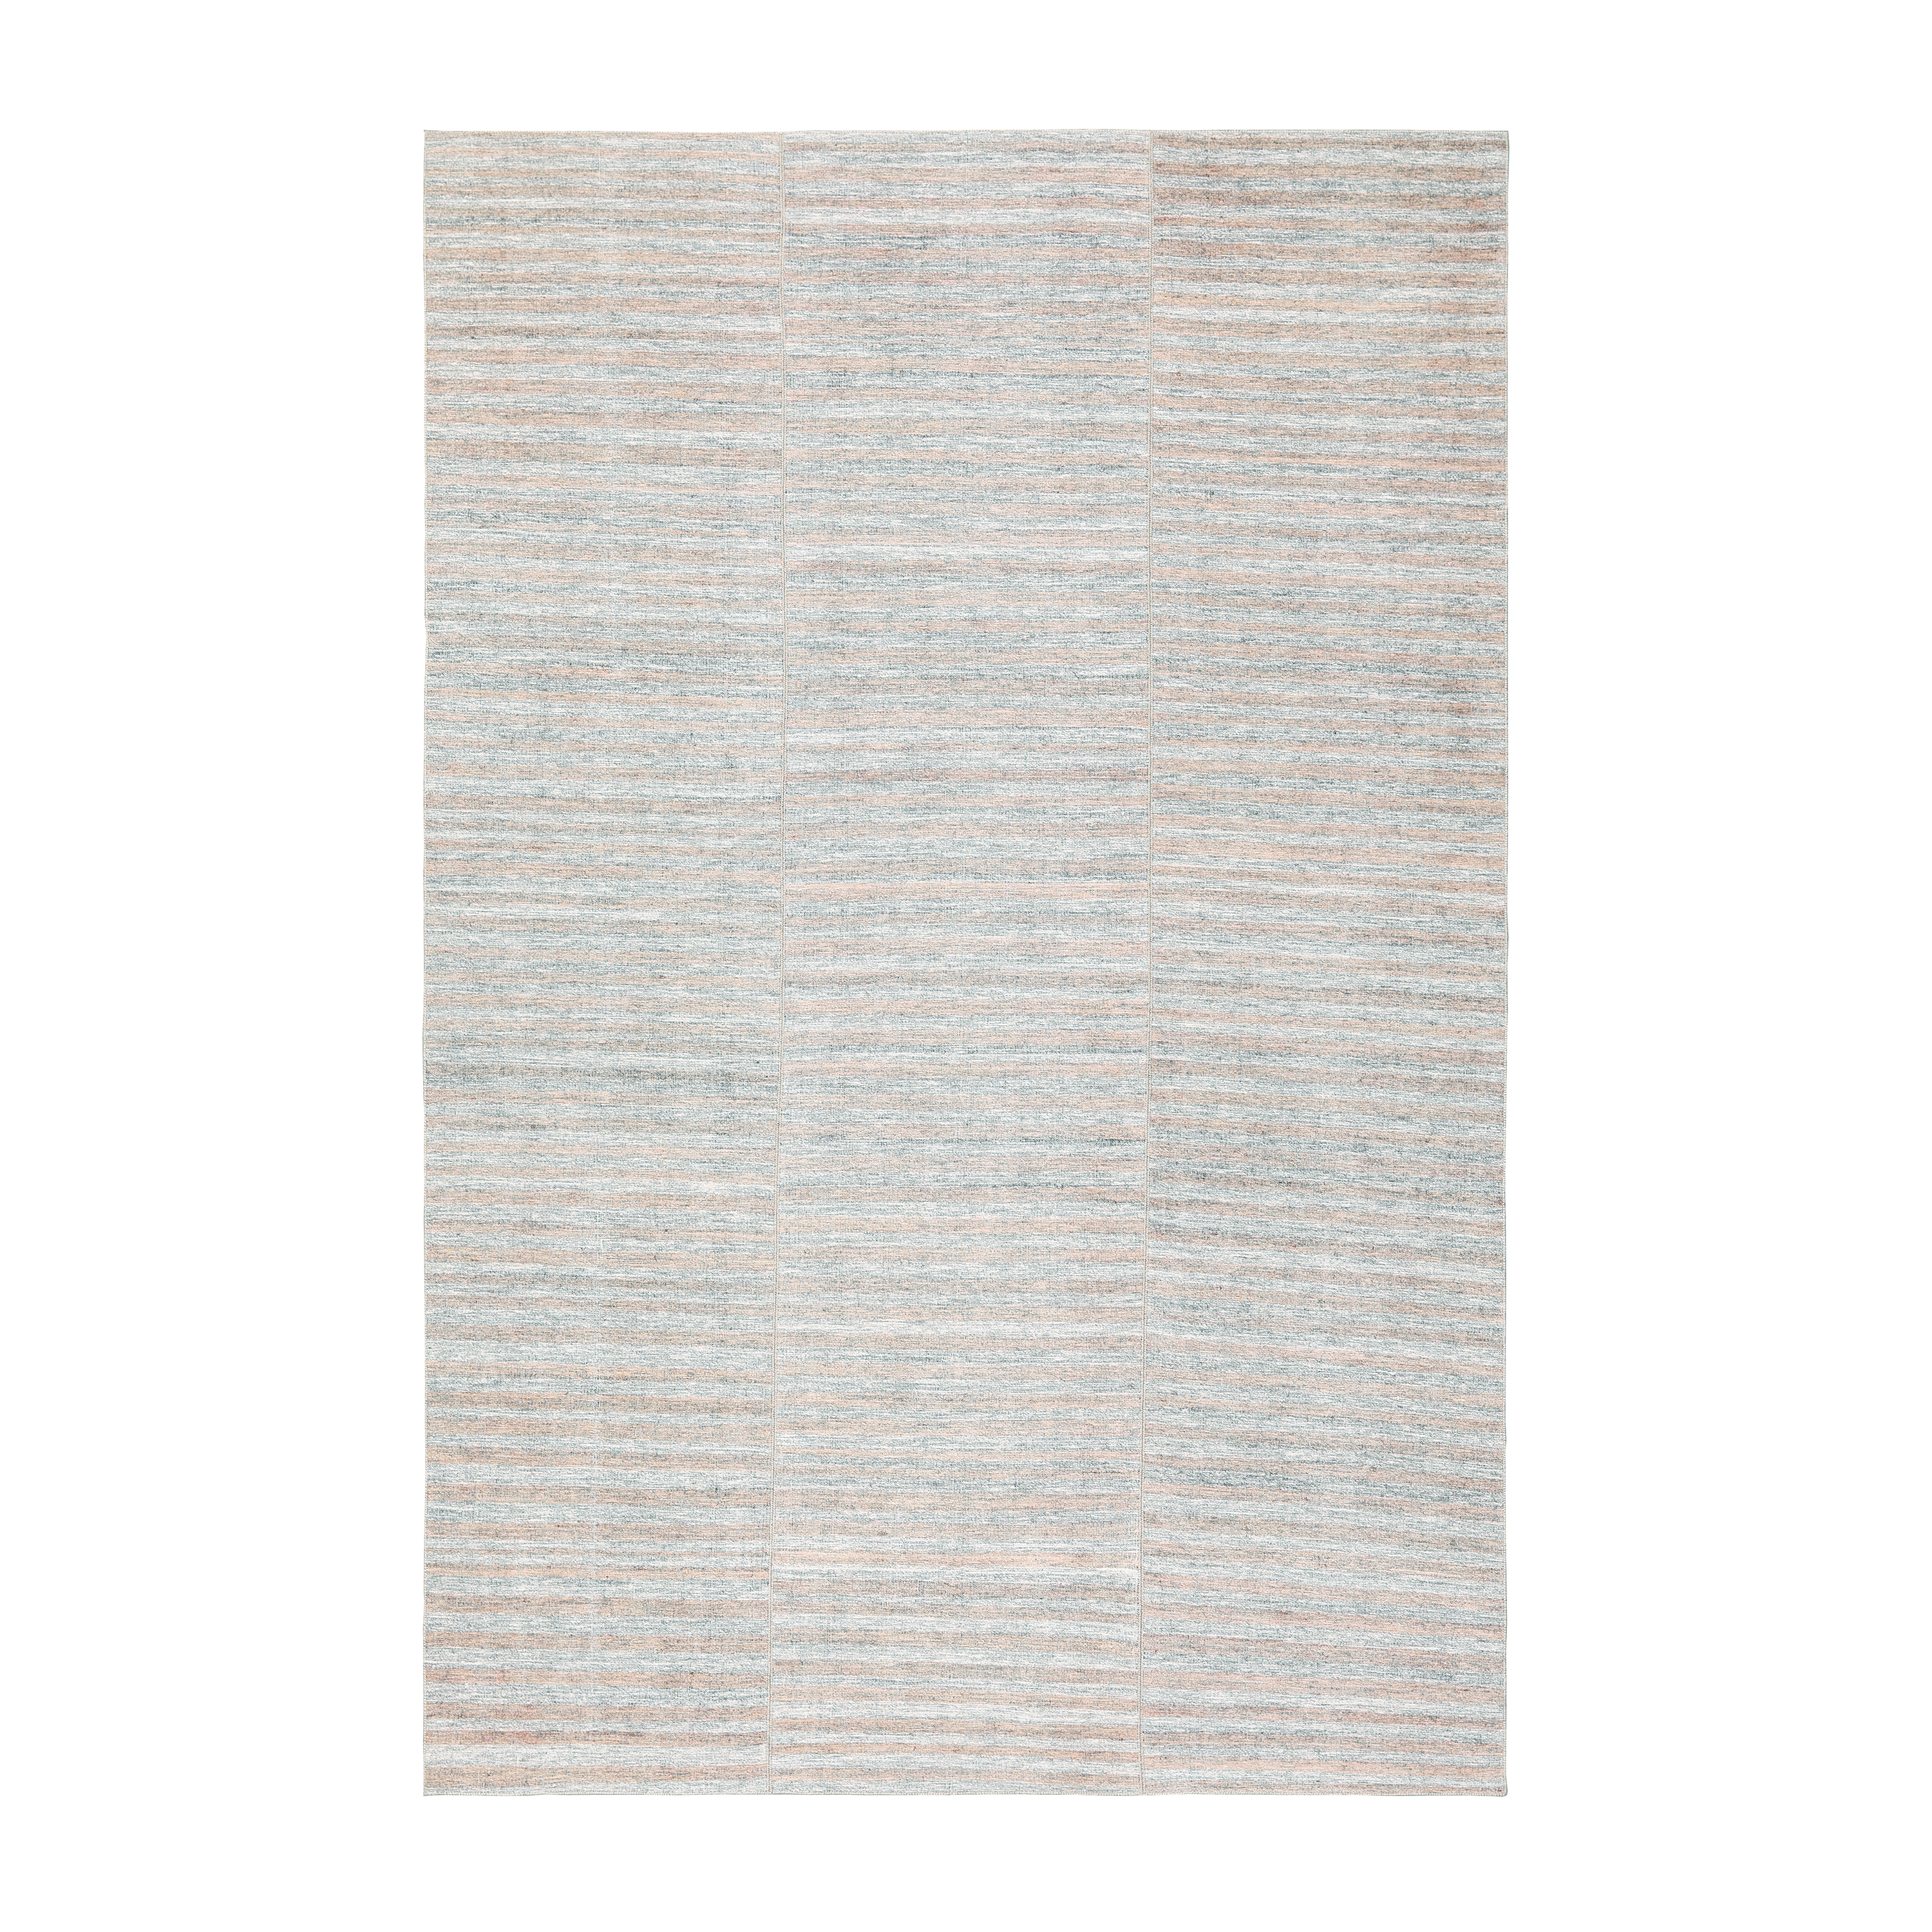 This Vintage flatweave rug is  hand-woven and made of wool and cotton.